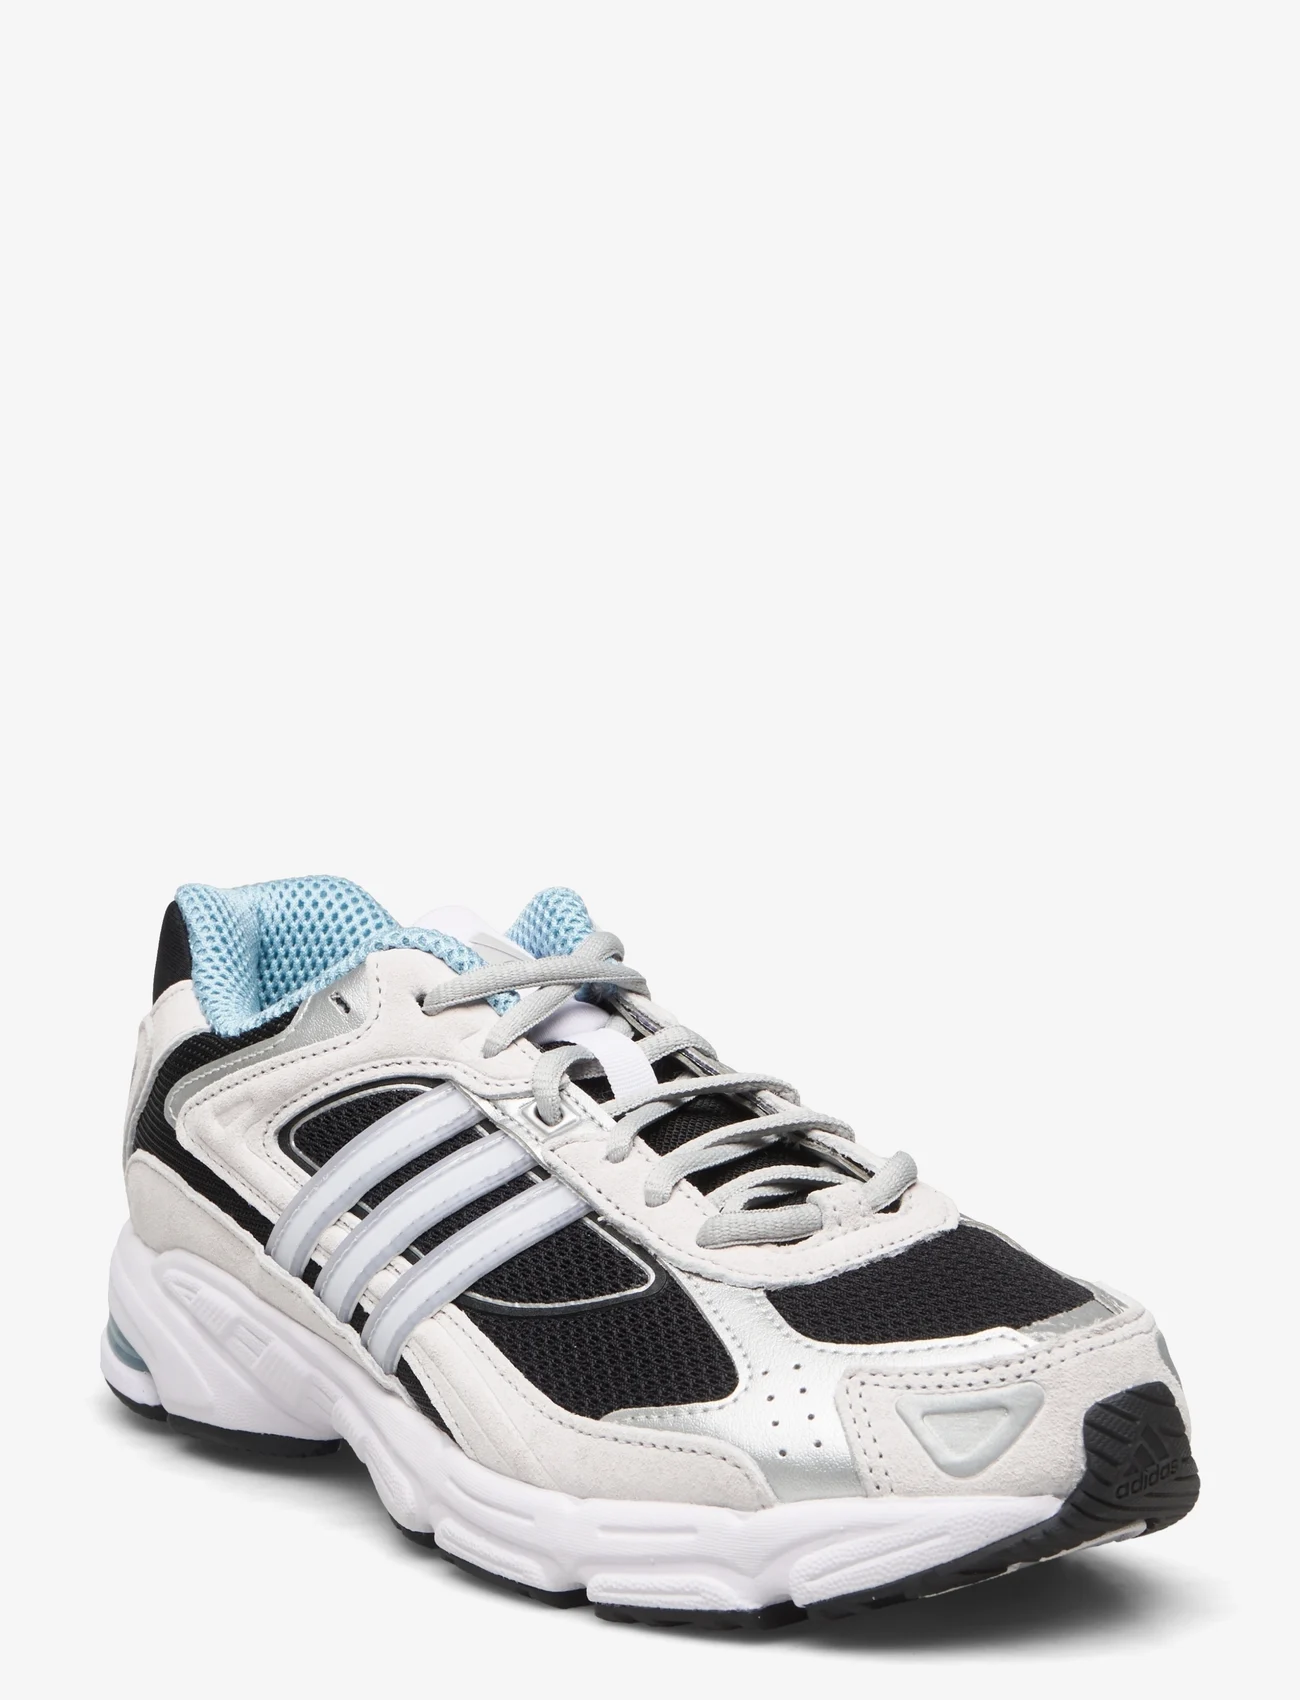 adidas Originals - Response CL Shoes - chunky sneakers - cblack/ftwwht/clblue - 0